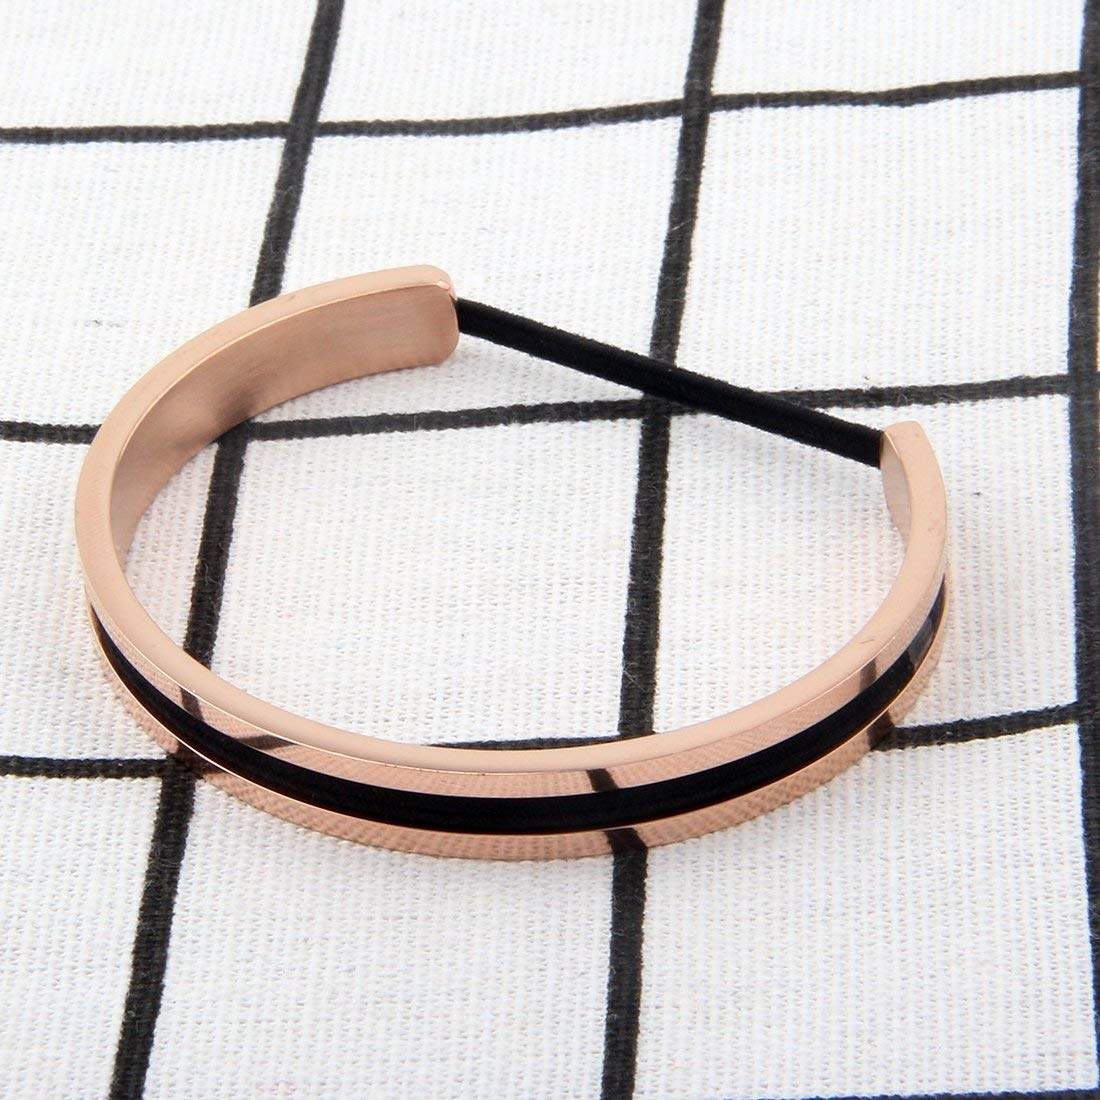 A gold bracelet with a groove for keeping a hair tie